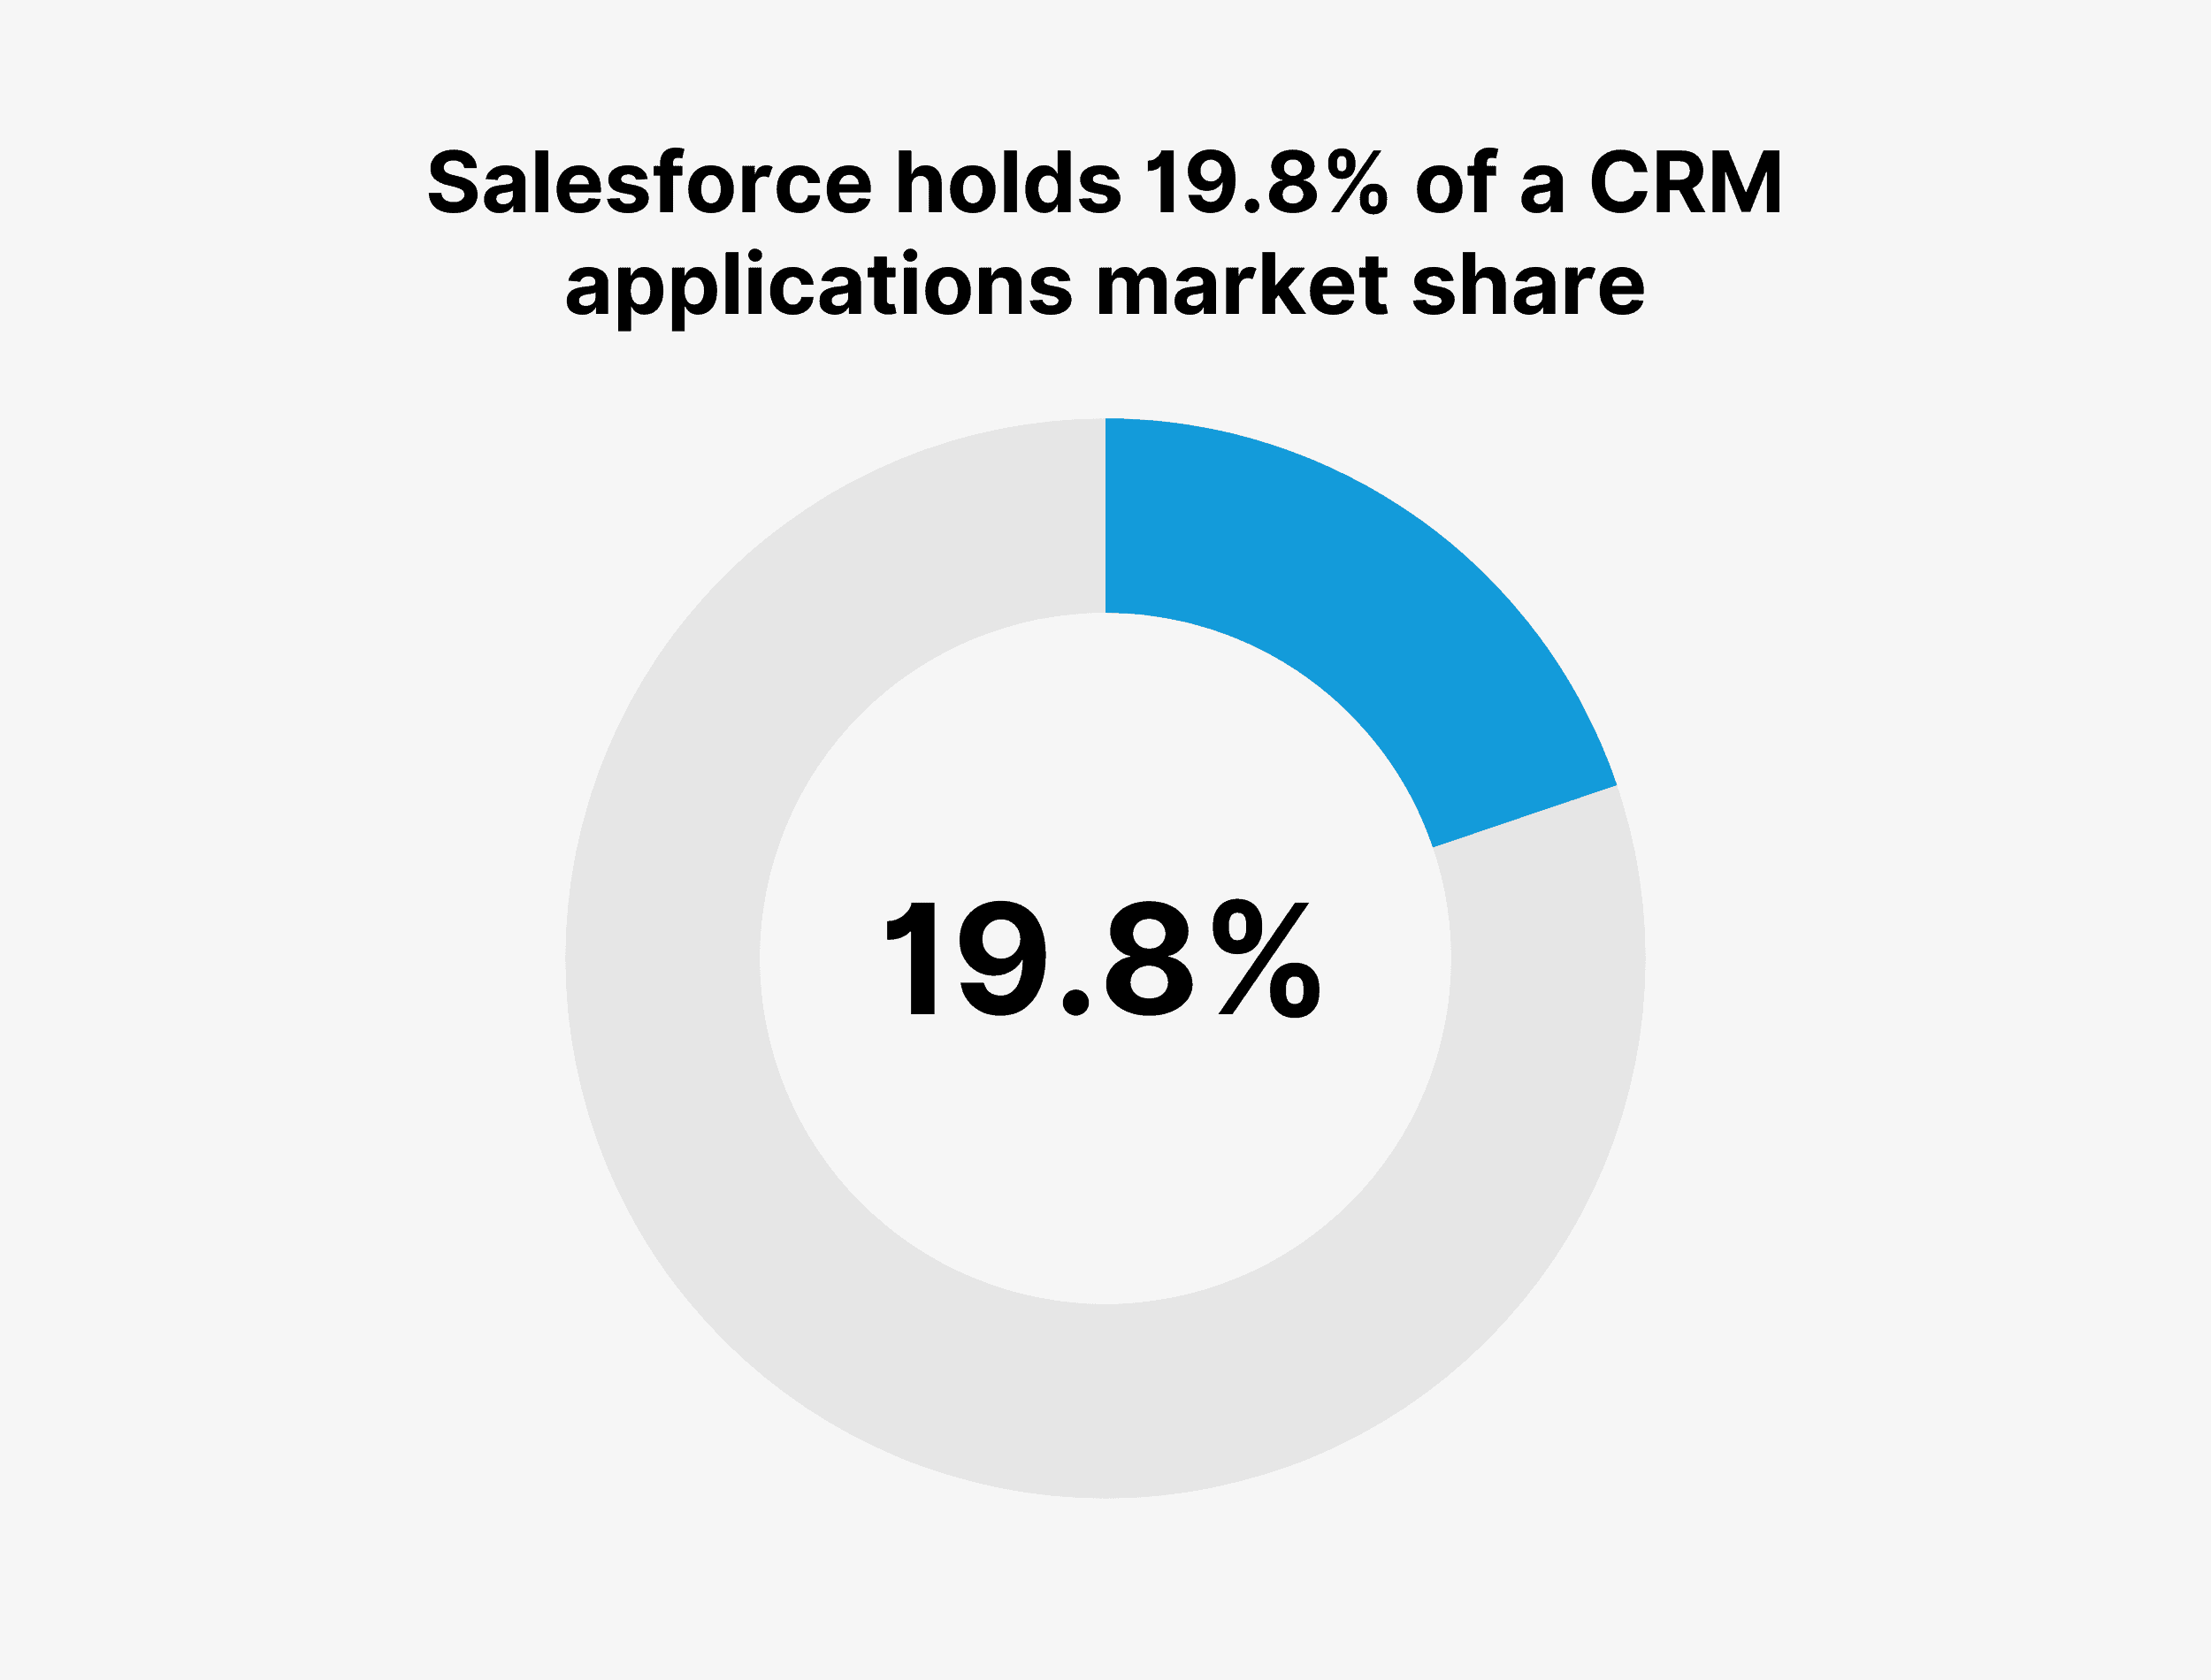 Salesforce holds 19.8% of a CRM applications market share